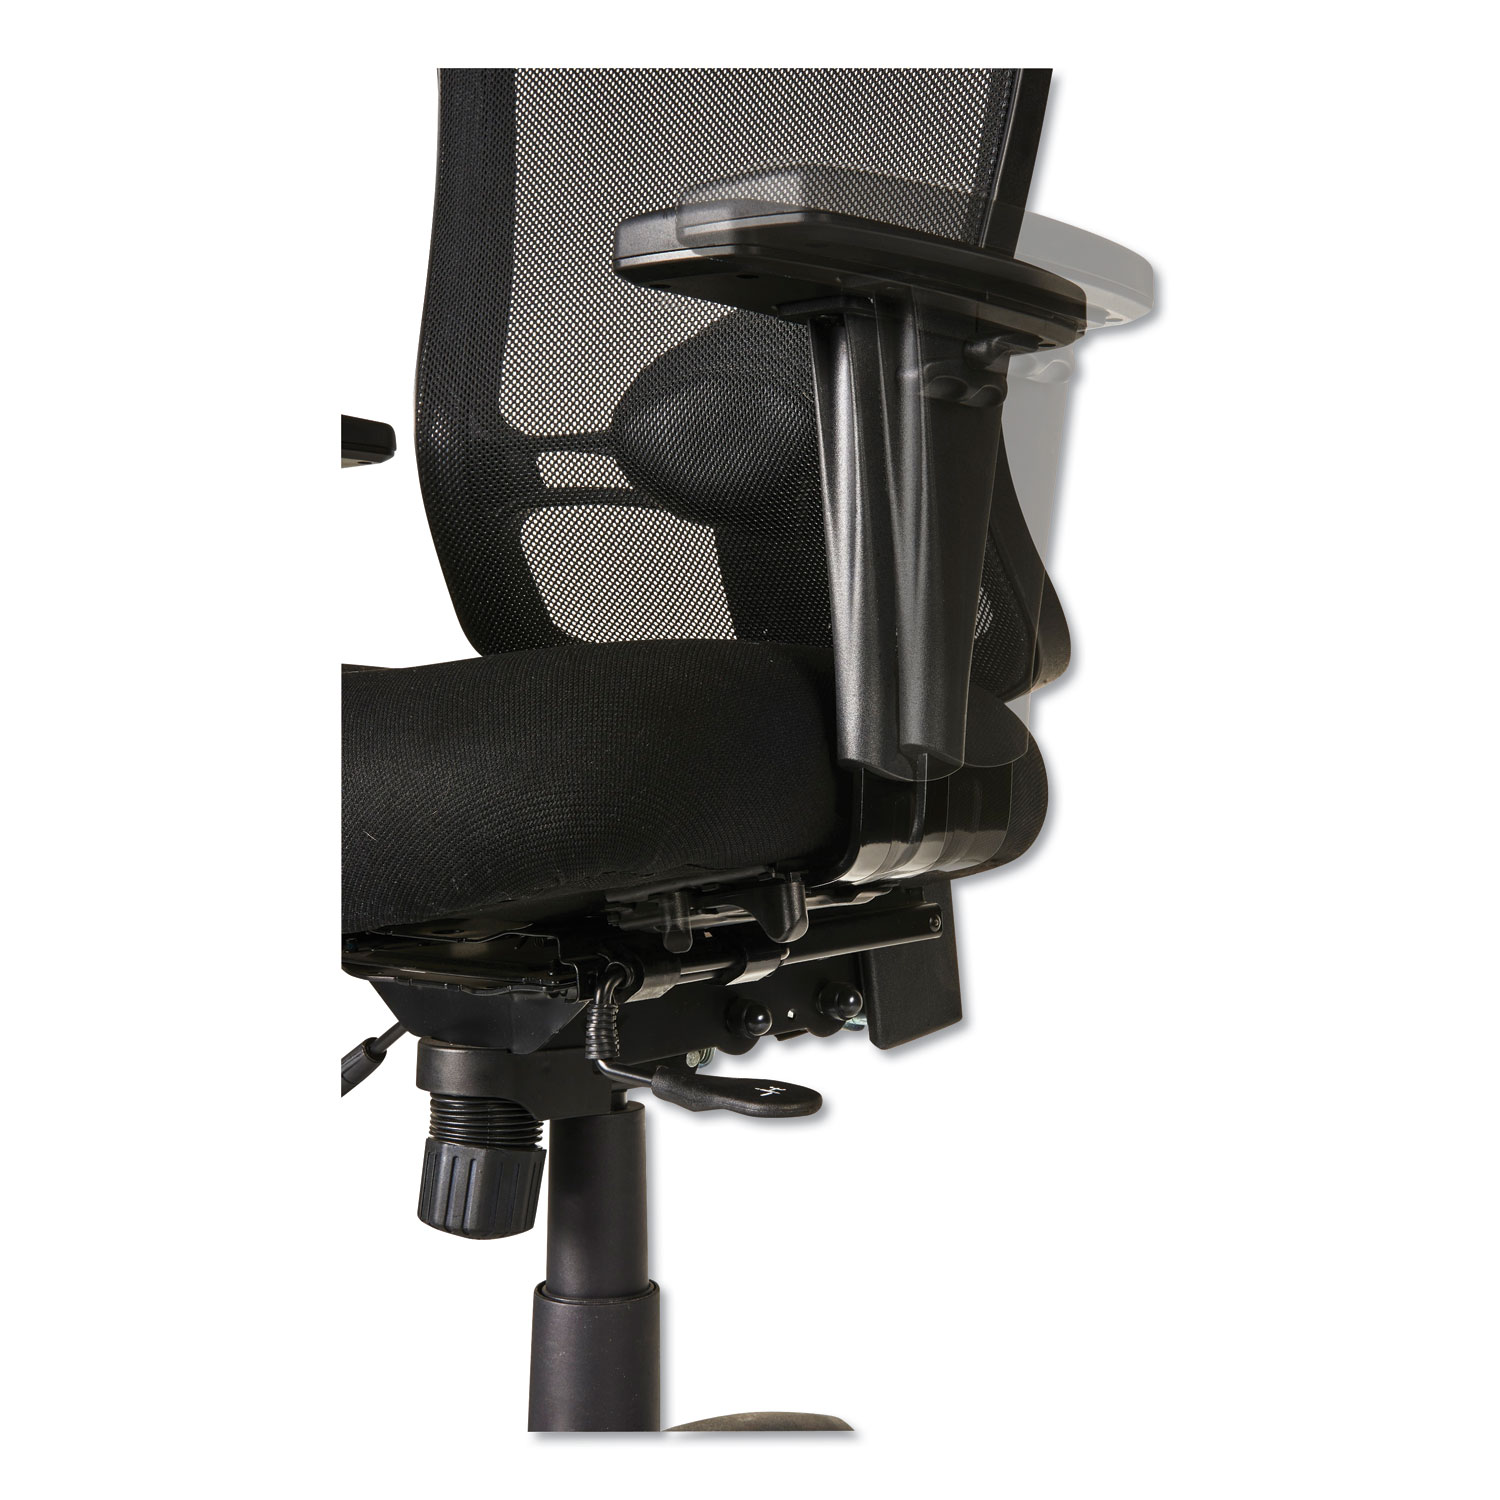 Alera Etros Series High-Back Multifunction with Seat Slide Chair, Supports up to 275 lbs., Black Seat/Black Back, Black Base